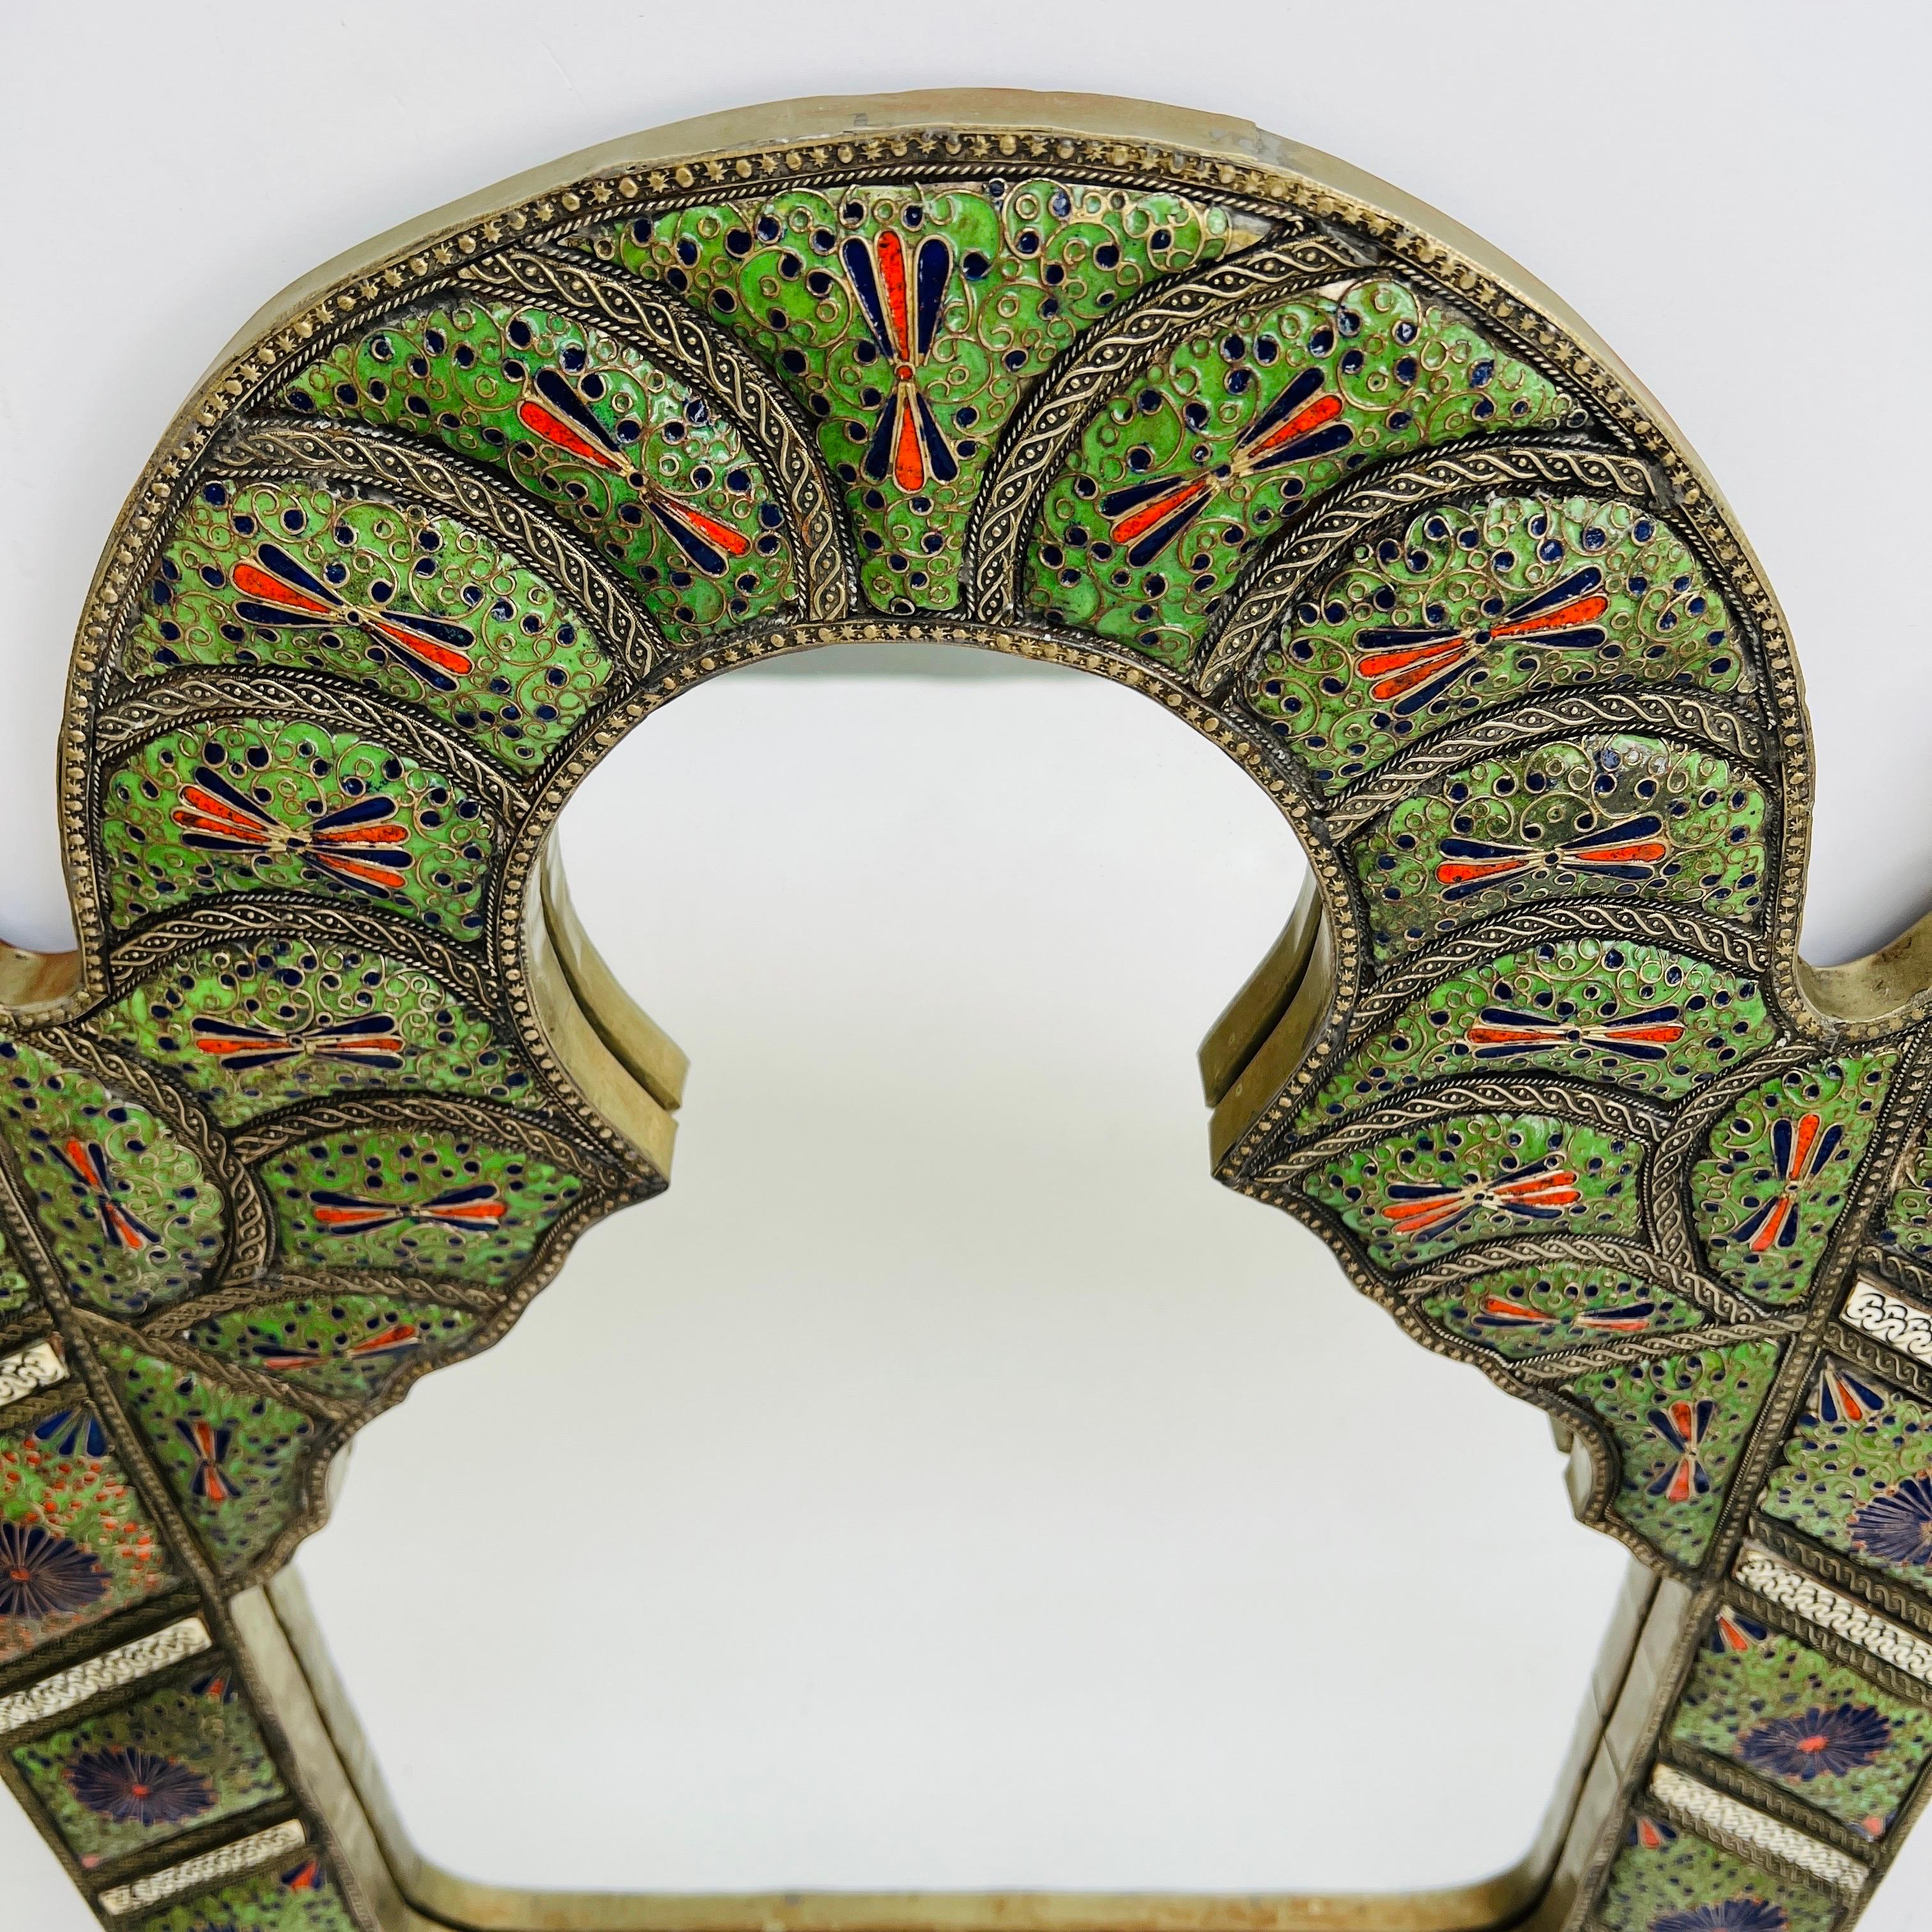 Moorish Arch Mirror in Enameled Cloisonné with Bone Inlays, Morocco c. 1950's For Sale 2